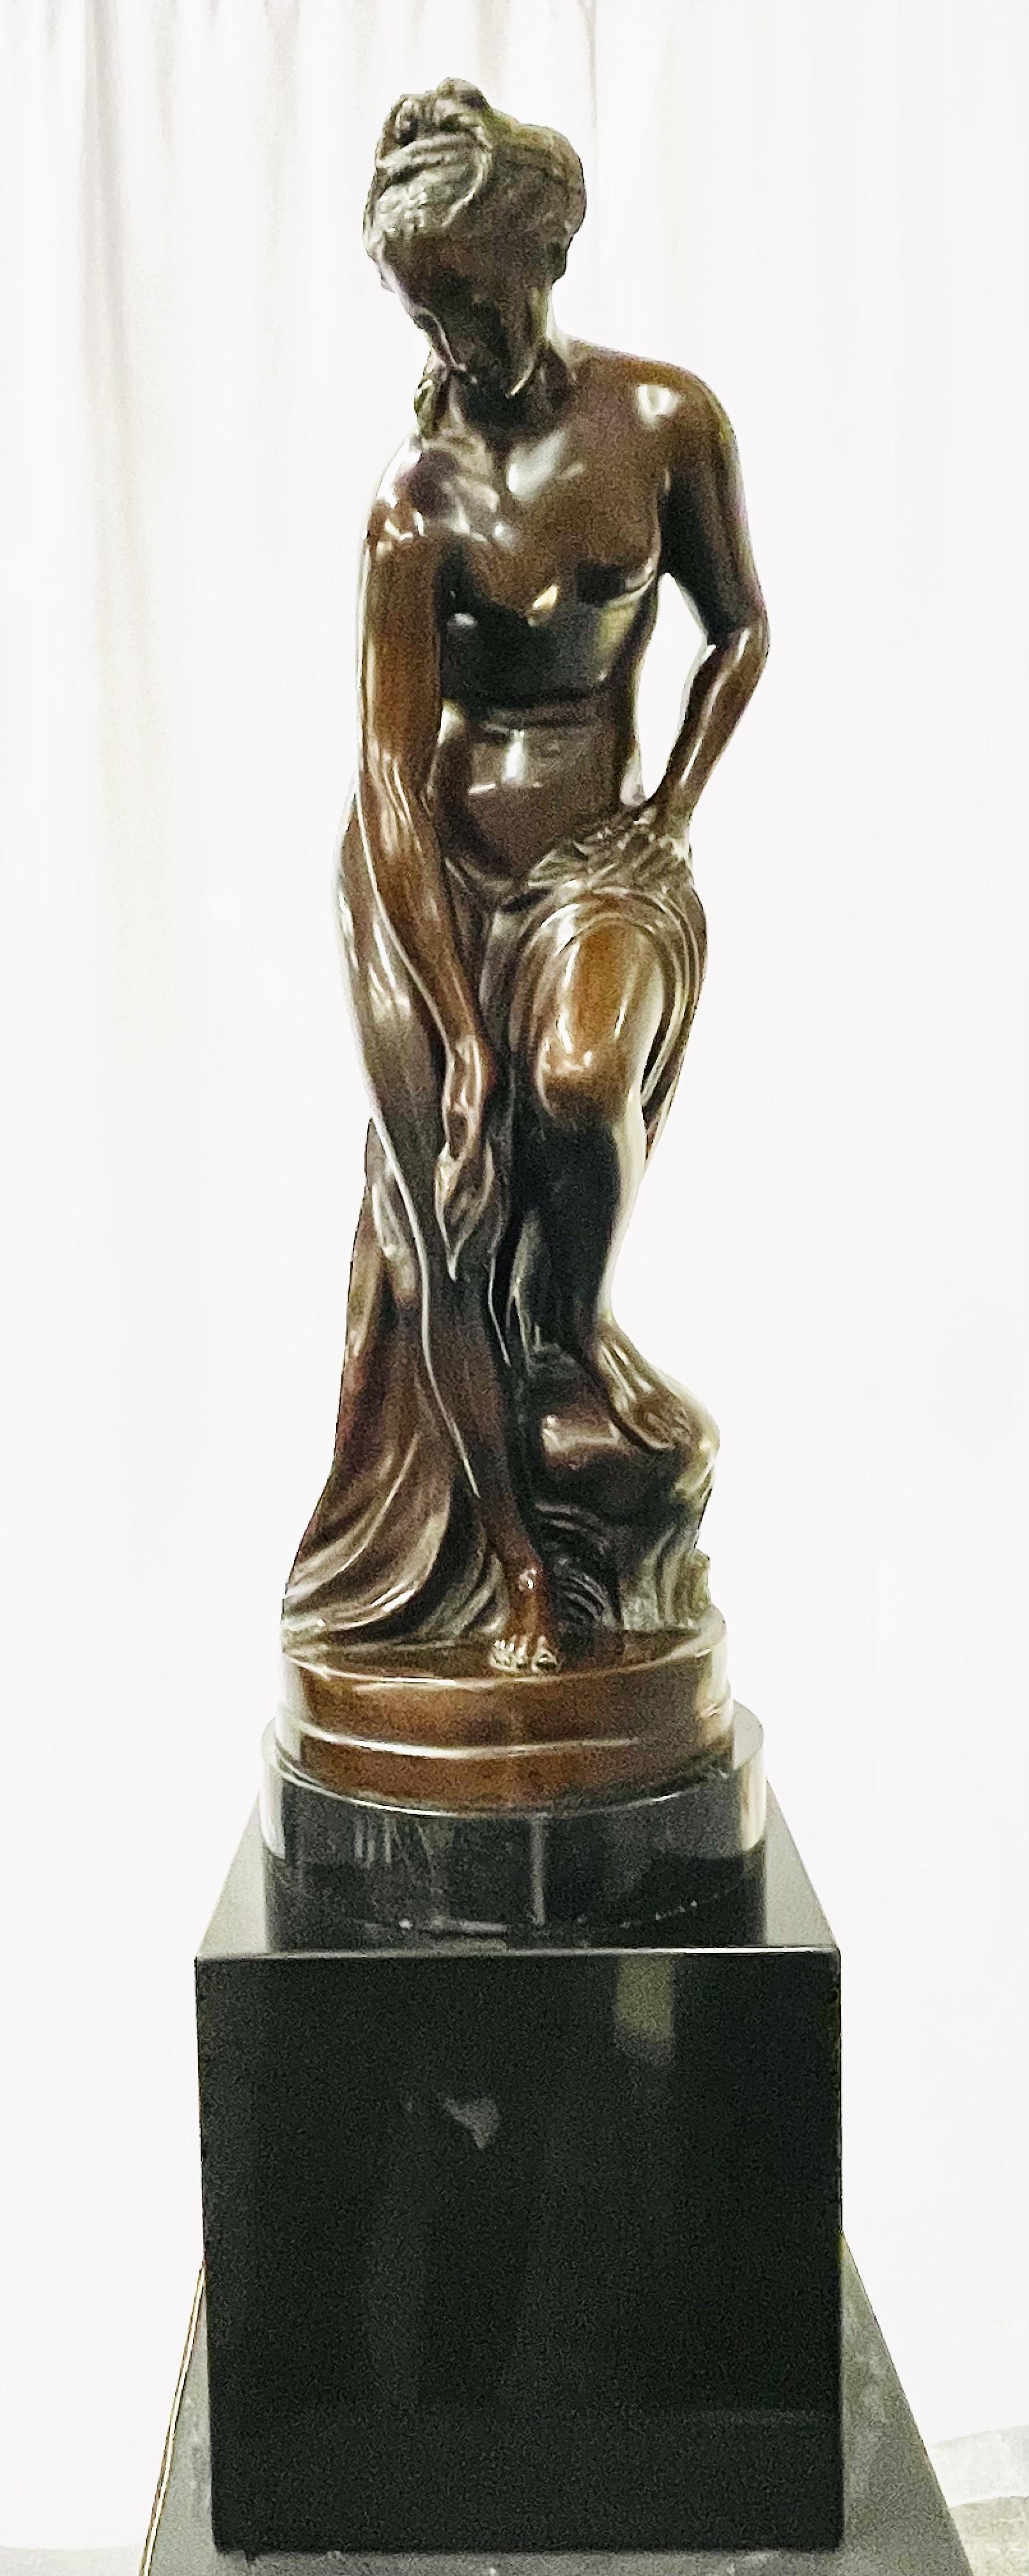 After Ferdinando de Luca (1785 - 1869) sculpture of a large and impressive nude on a marble base. Bare breasted with her robed draped over one arm. A stunning example of this artist work.

Statue: 31 in. height x 10 in. diameter
Base: 12 in.